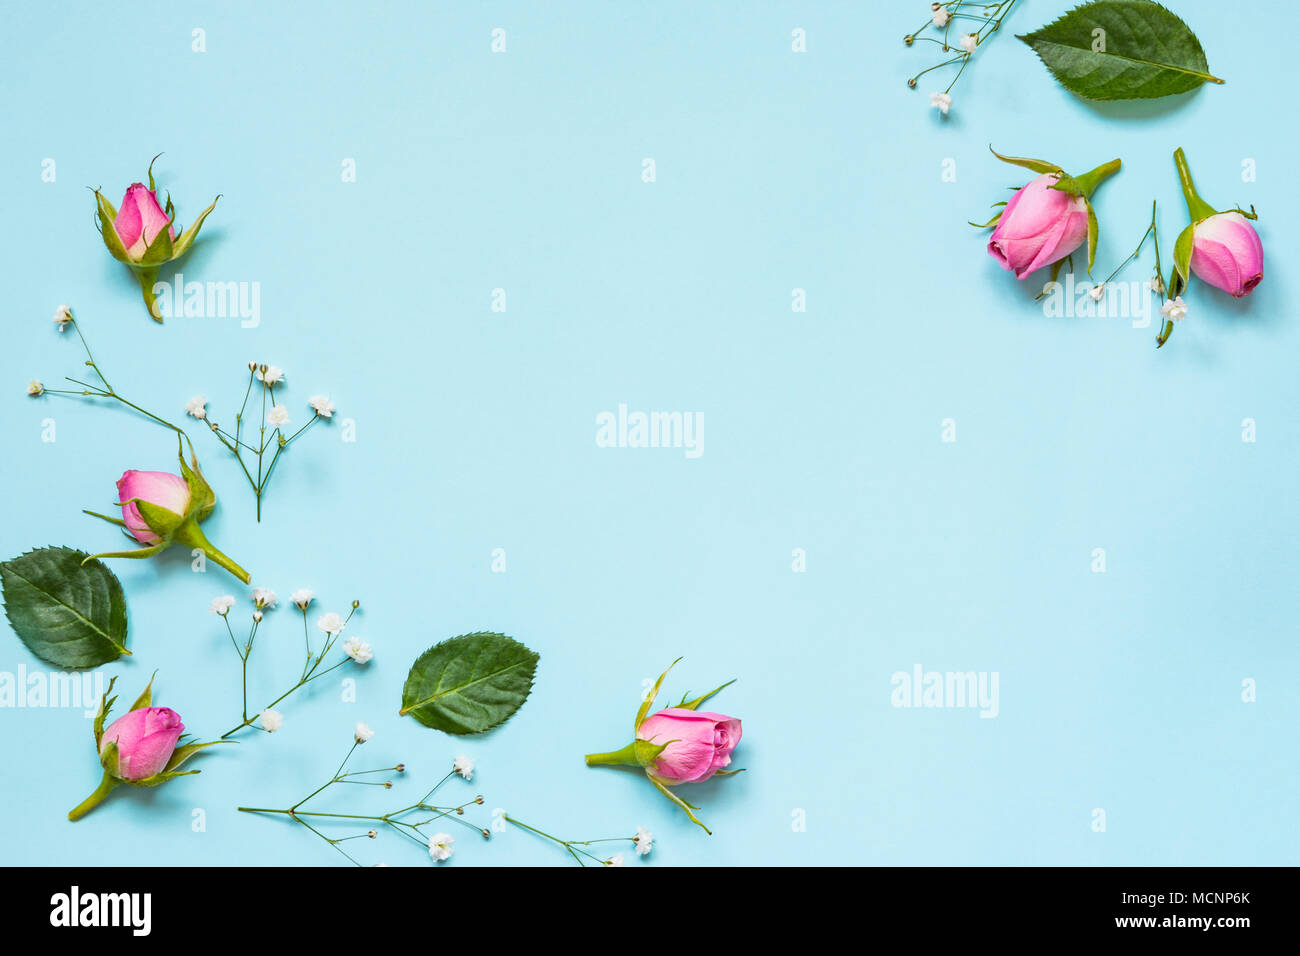 Top view of pink roses and green leaves over blue background. Abstract floral background. Copy space. Stock Photo